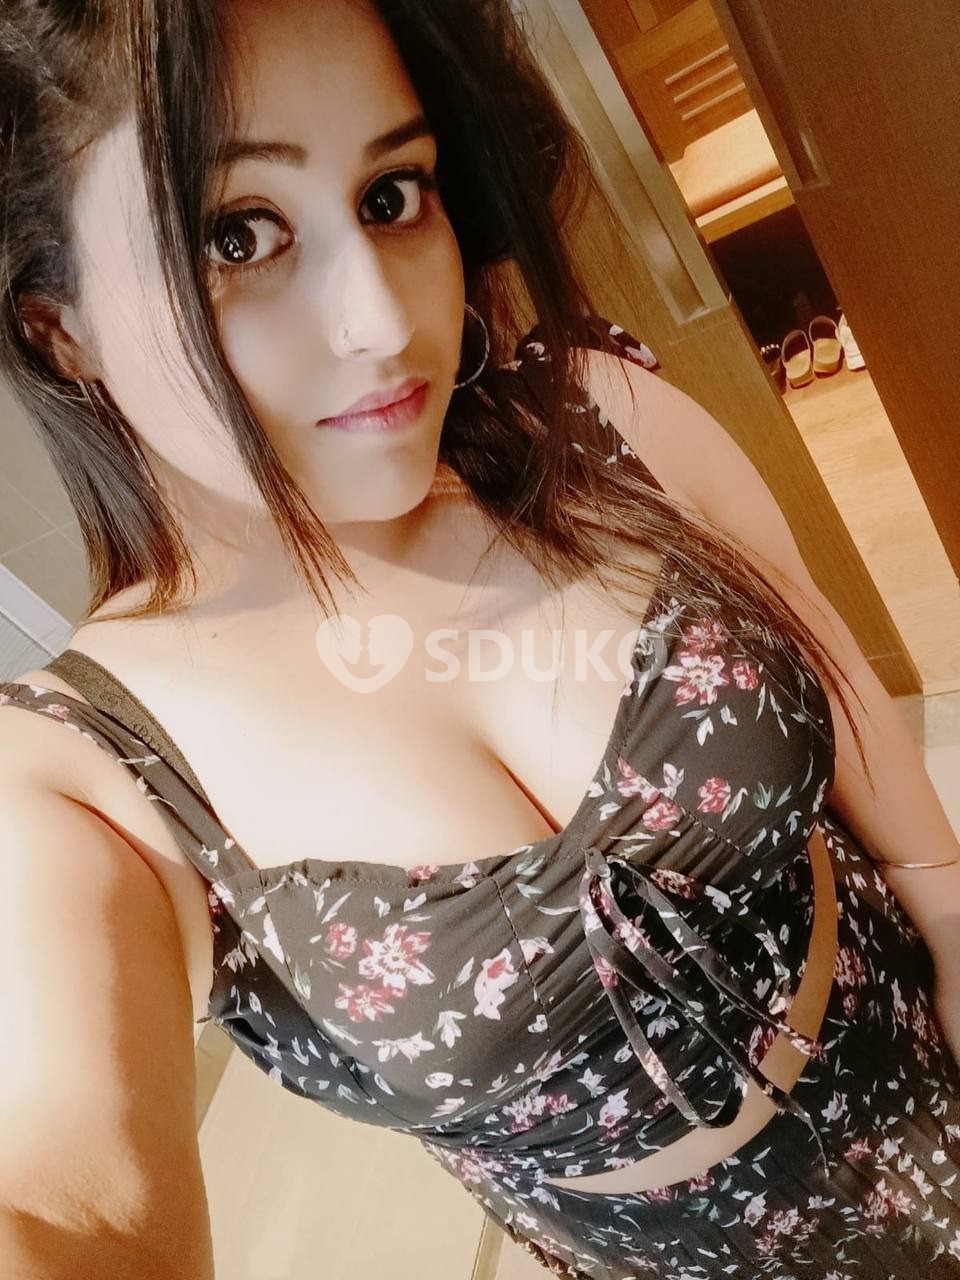 AMRITSAR AFFORDABLE AND CHAPTER HIGH CLASS FAMILY GIRLS 24 HOURS AVAILABLE